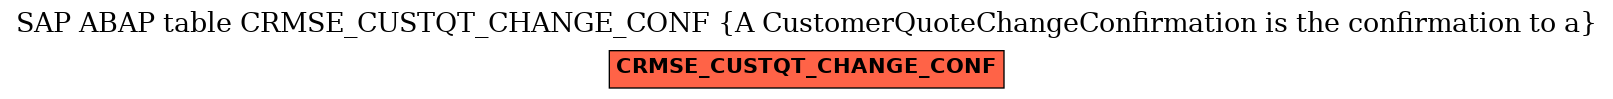 E-R Diagram for table CRMSE_CUSTQT_CHANGE_CONF (A CustomerQuoteChangeConfirmation is the confirmation to a)